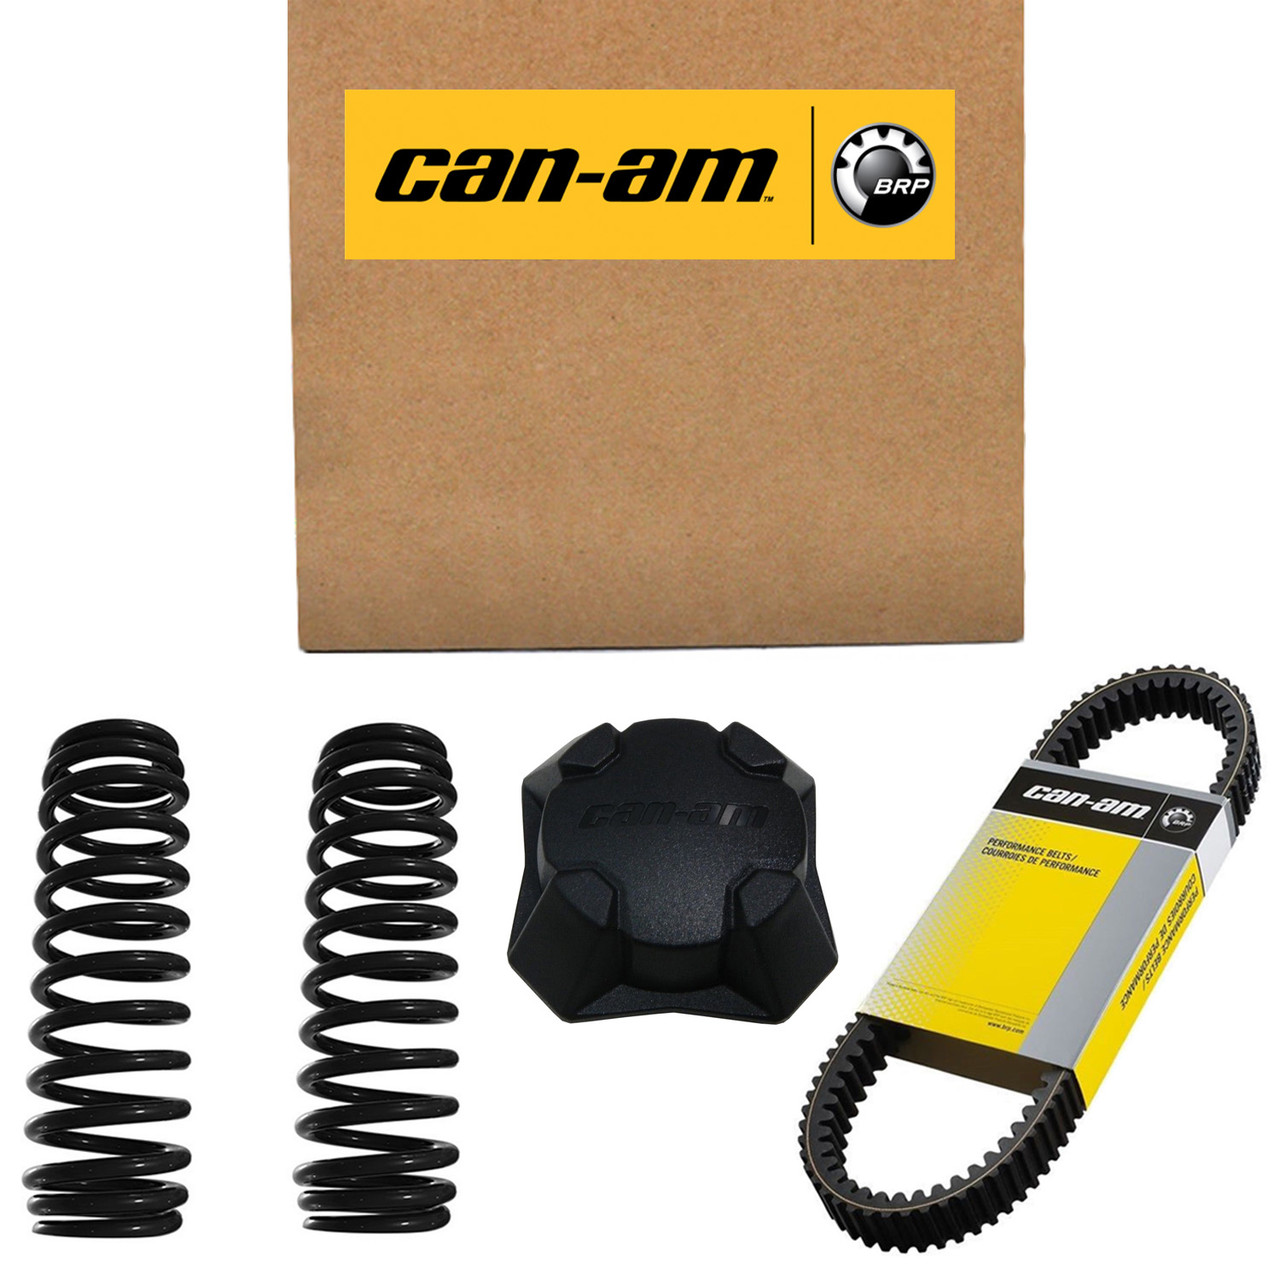 Can-Am New OEM, G2 G2S Apache 360 & 360 LT Mounting Kit, 715007206